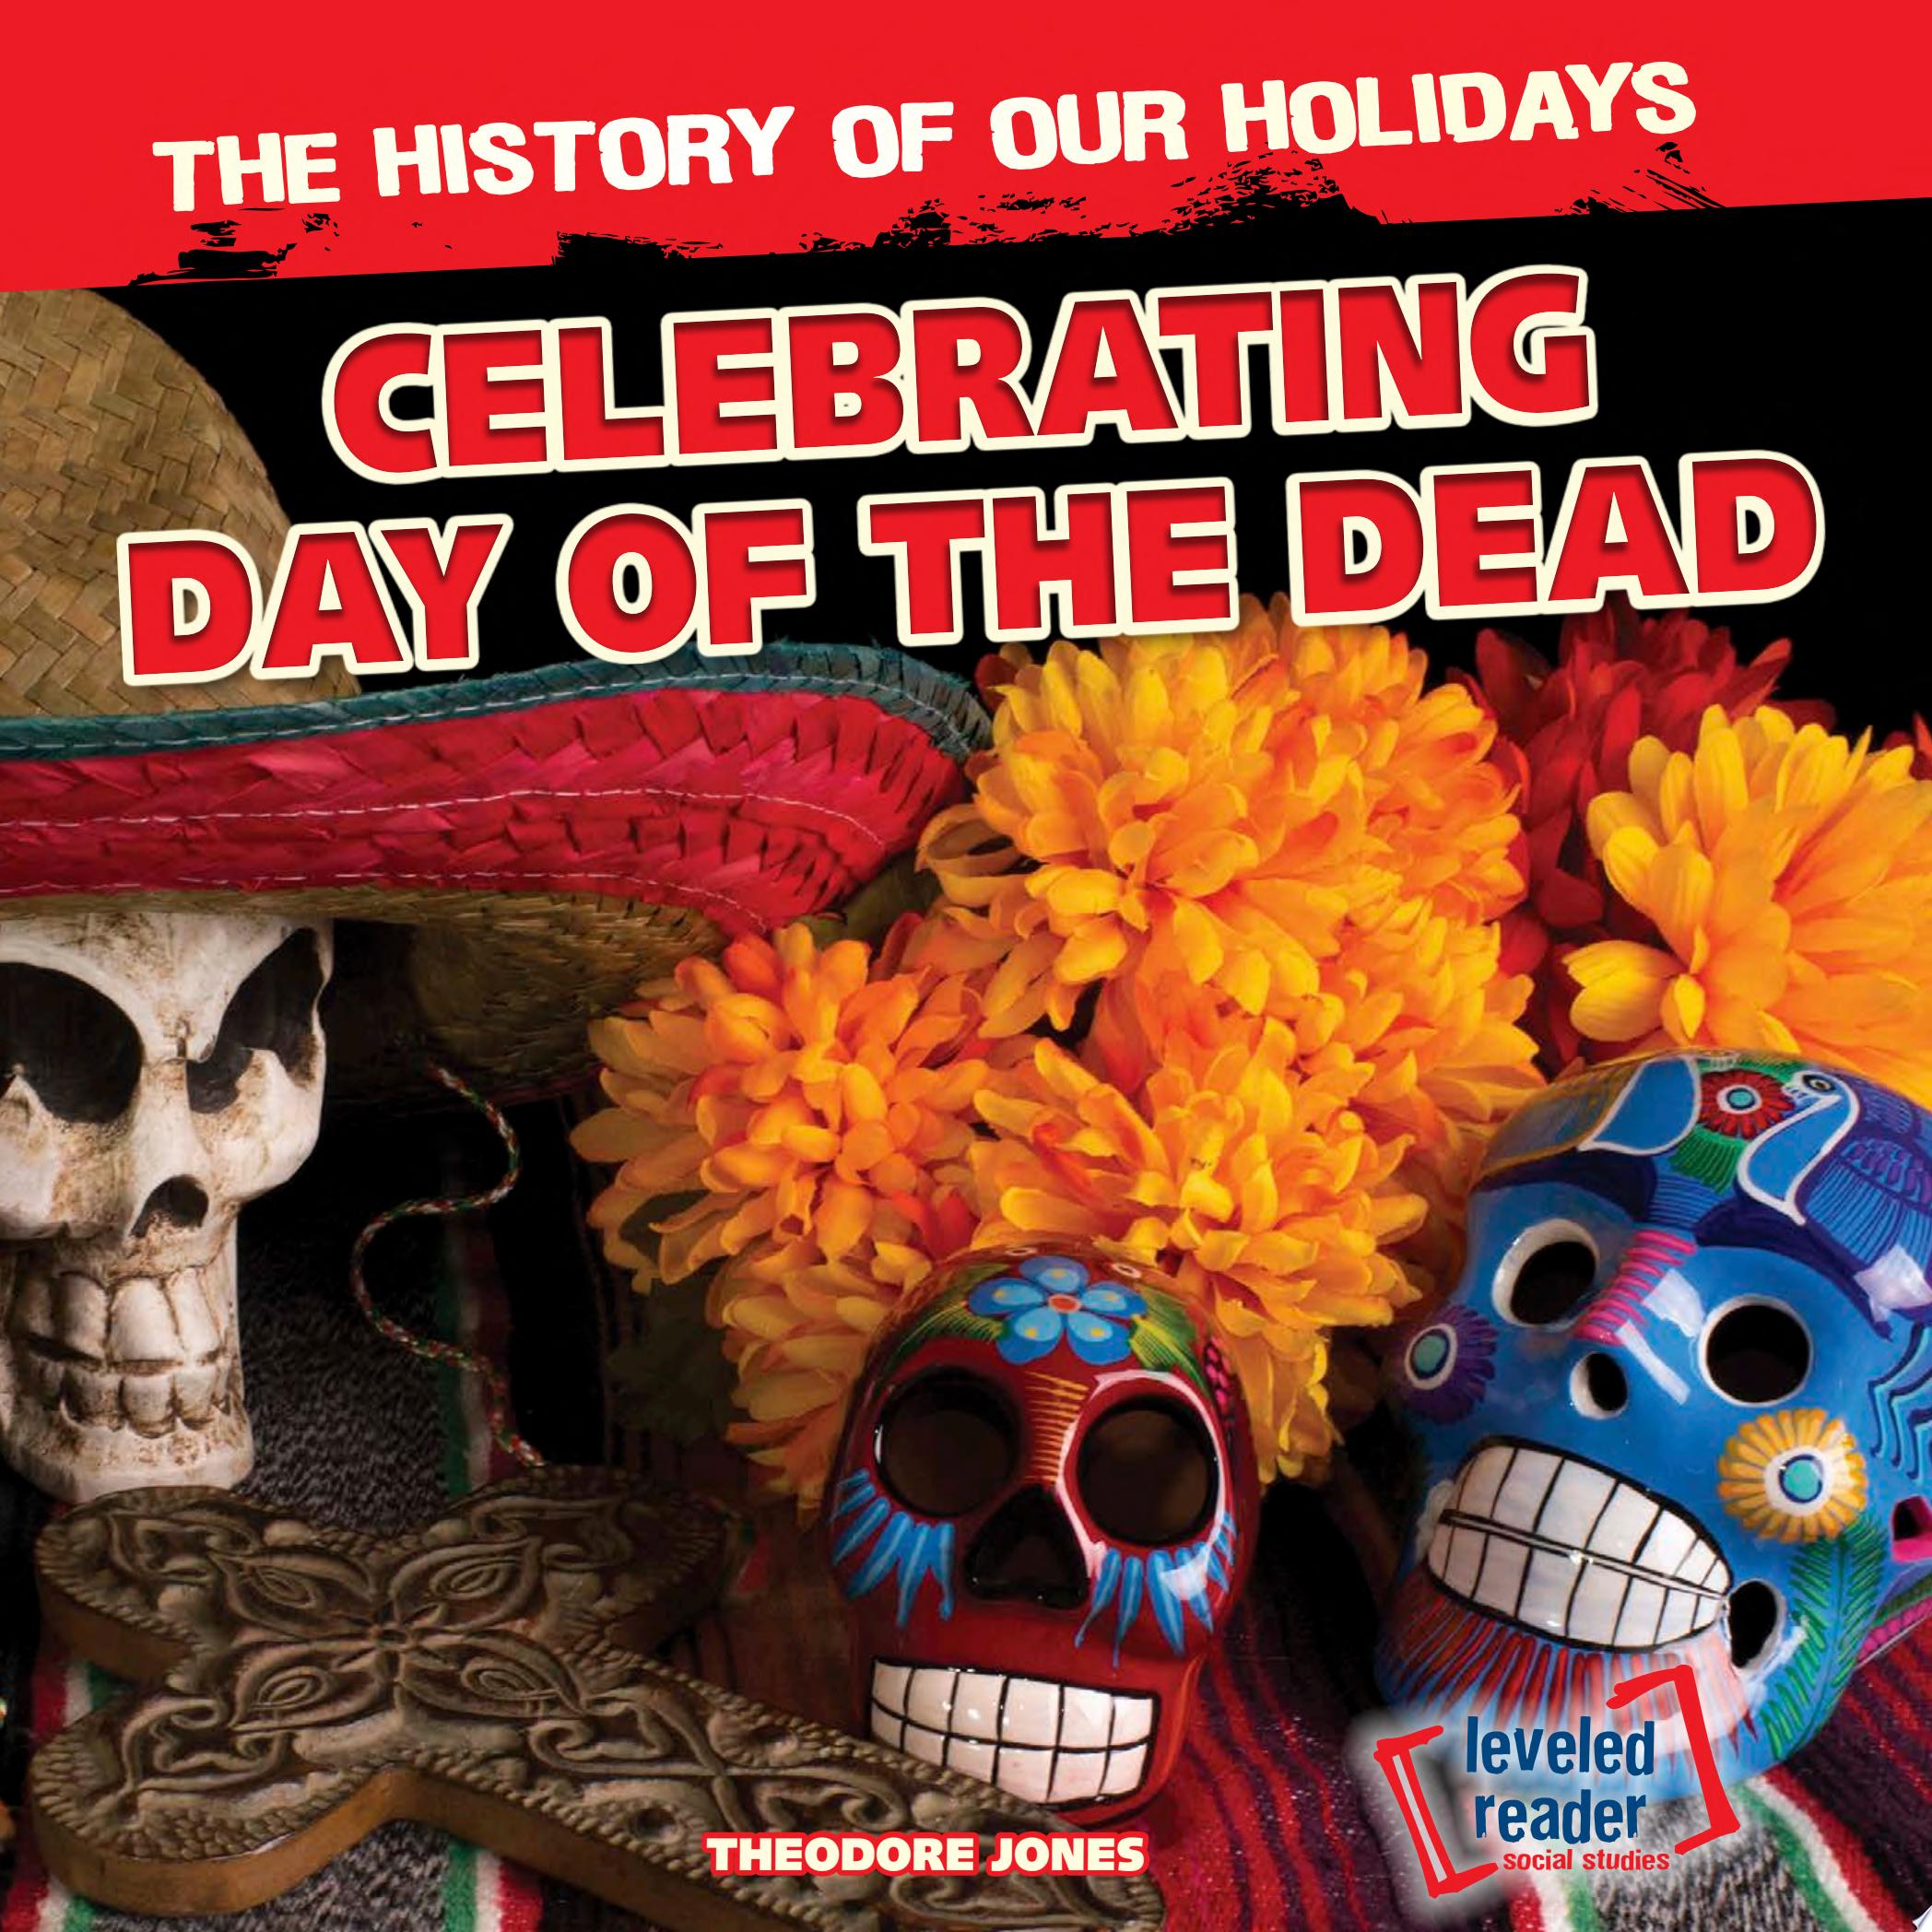 Image for "Celebrating Day of the Dead"